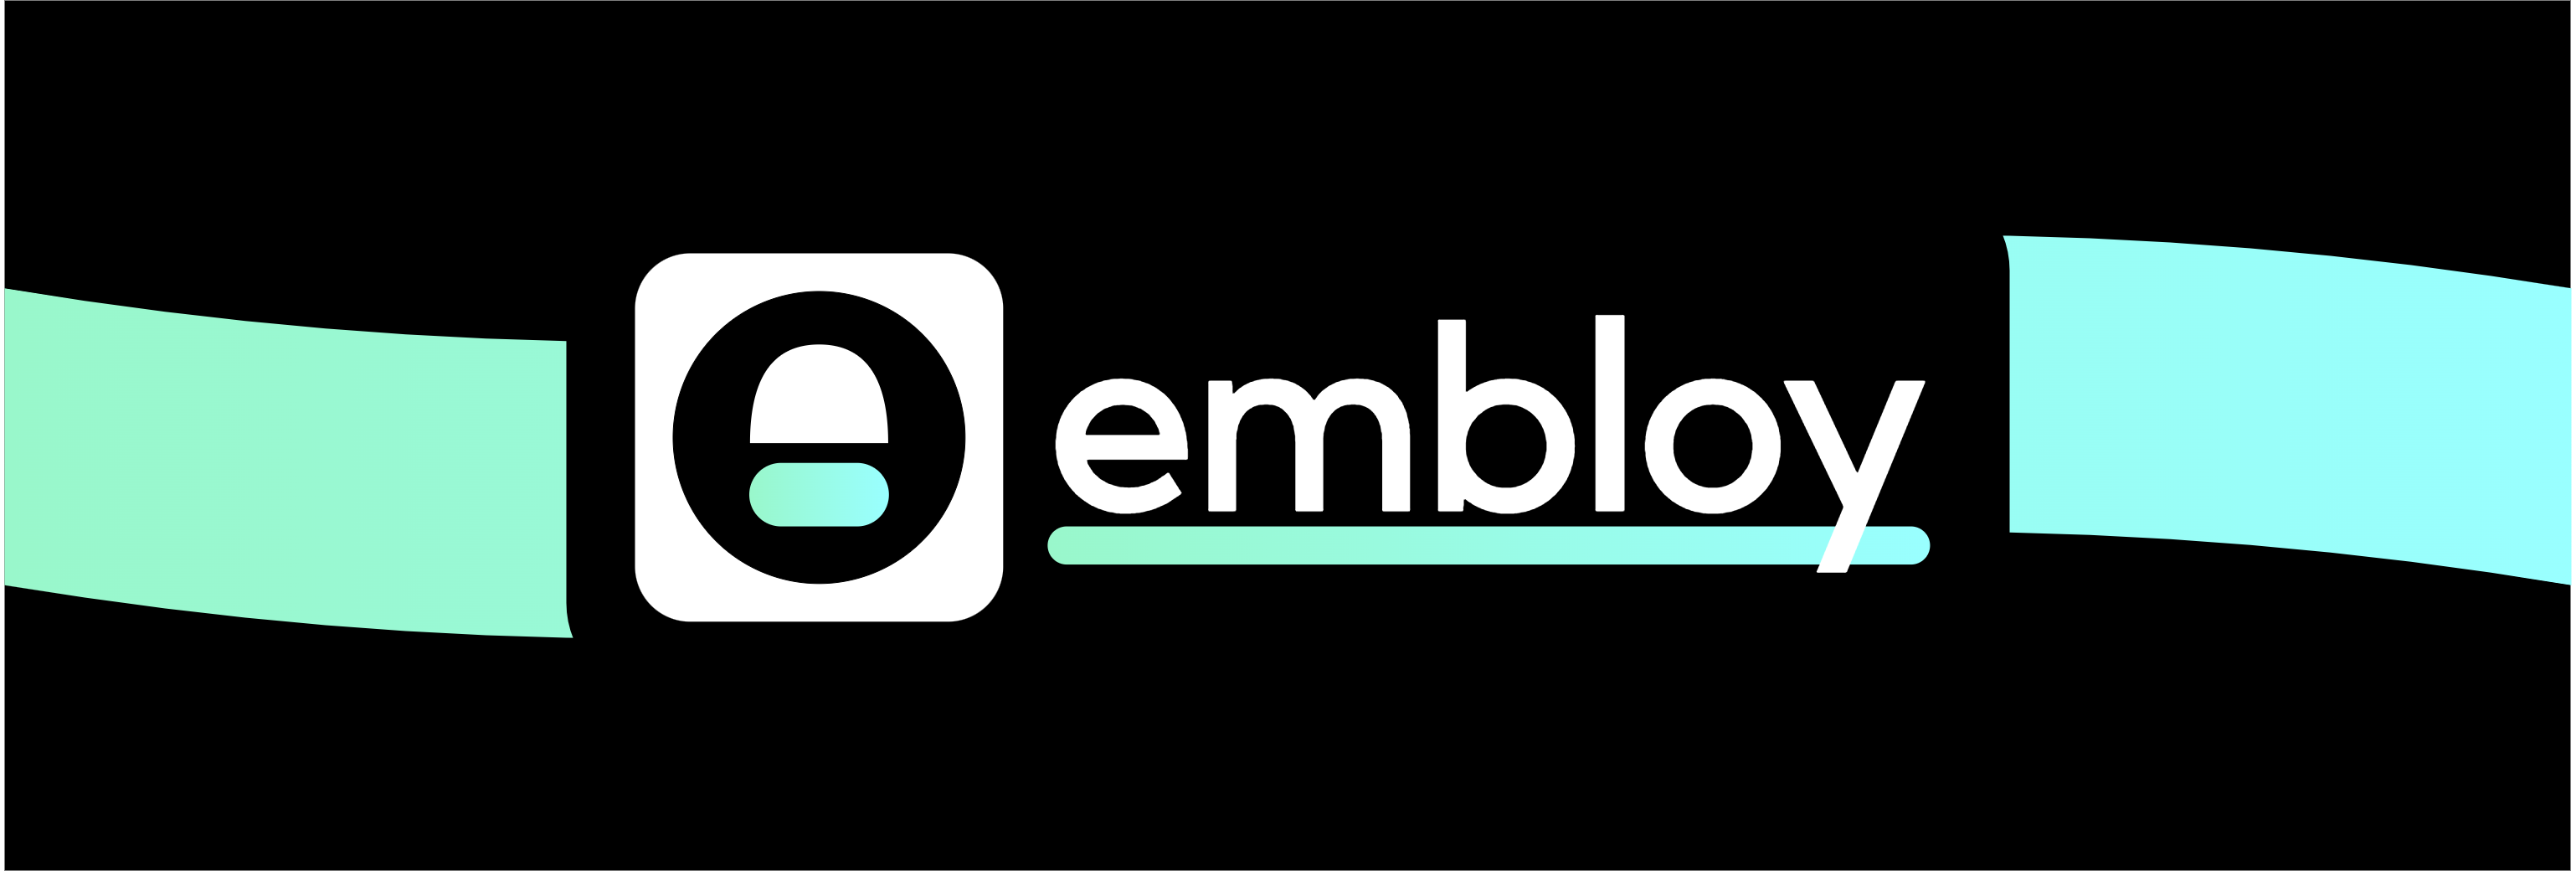 Colorful Embloy logo in front of a textured horizontal banner